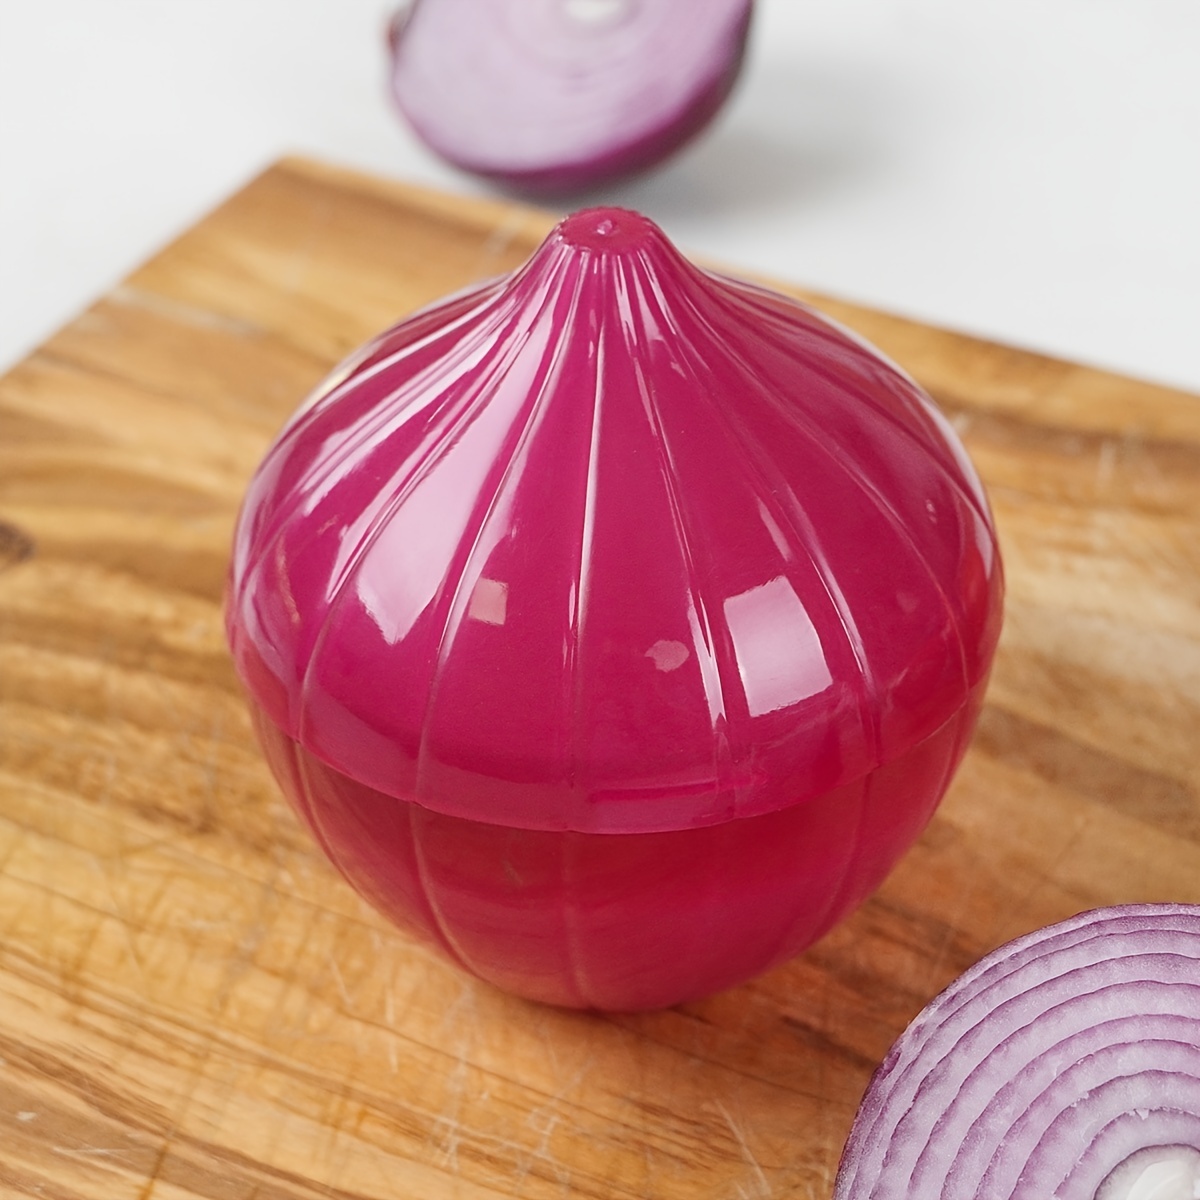 Hutzler Onion Saver Keeper Storage Durable Plastic Container - Keeps Fresh  Longer - 2 Pack - Yellow and Red Onion Set